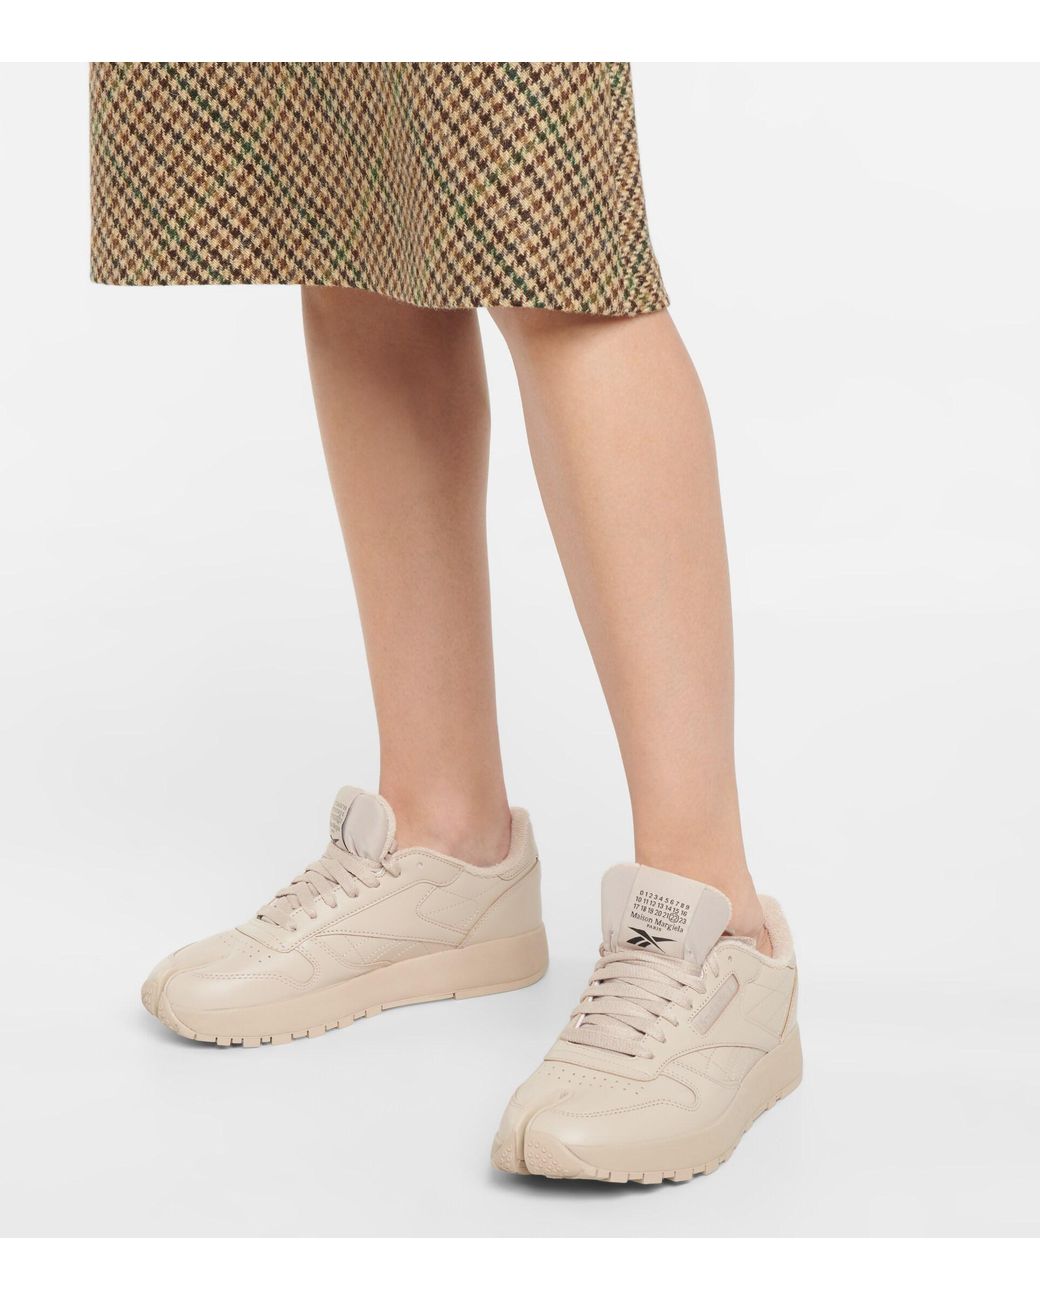 Maison Margiela X Reebok Classic Tabi Leather Sneakers in Natural | Lyst